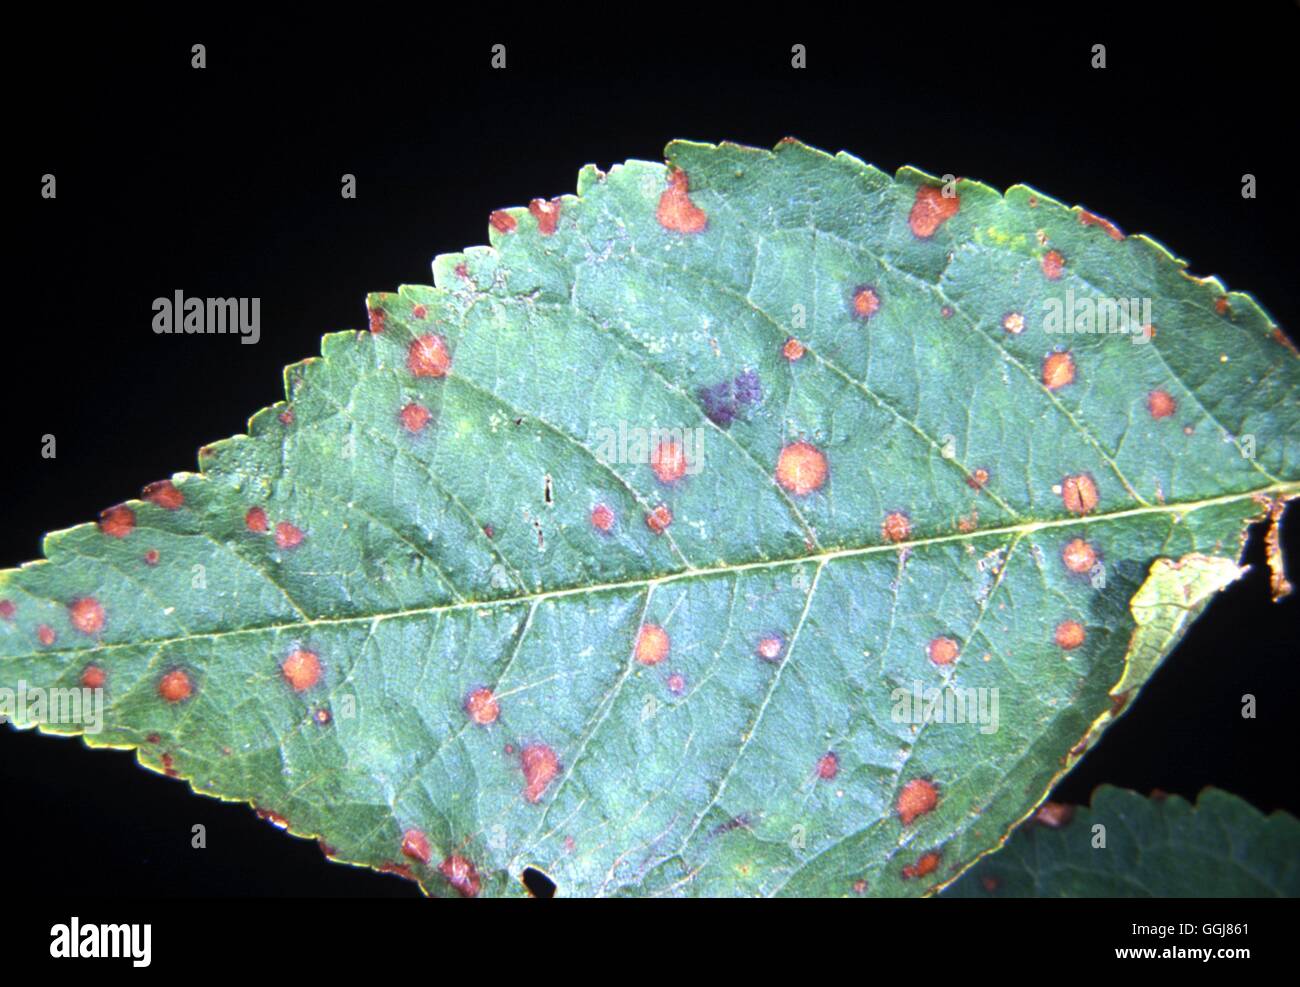 Canker  Plum and cherry bacterial canker causing shot hole on cherry  Date: 09/06/2008  DIS026293 Stock Photo